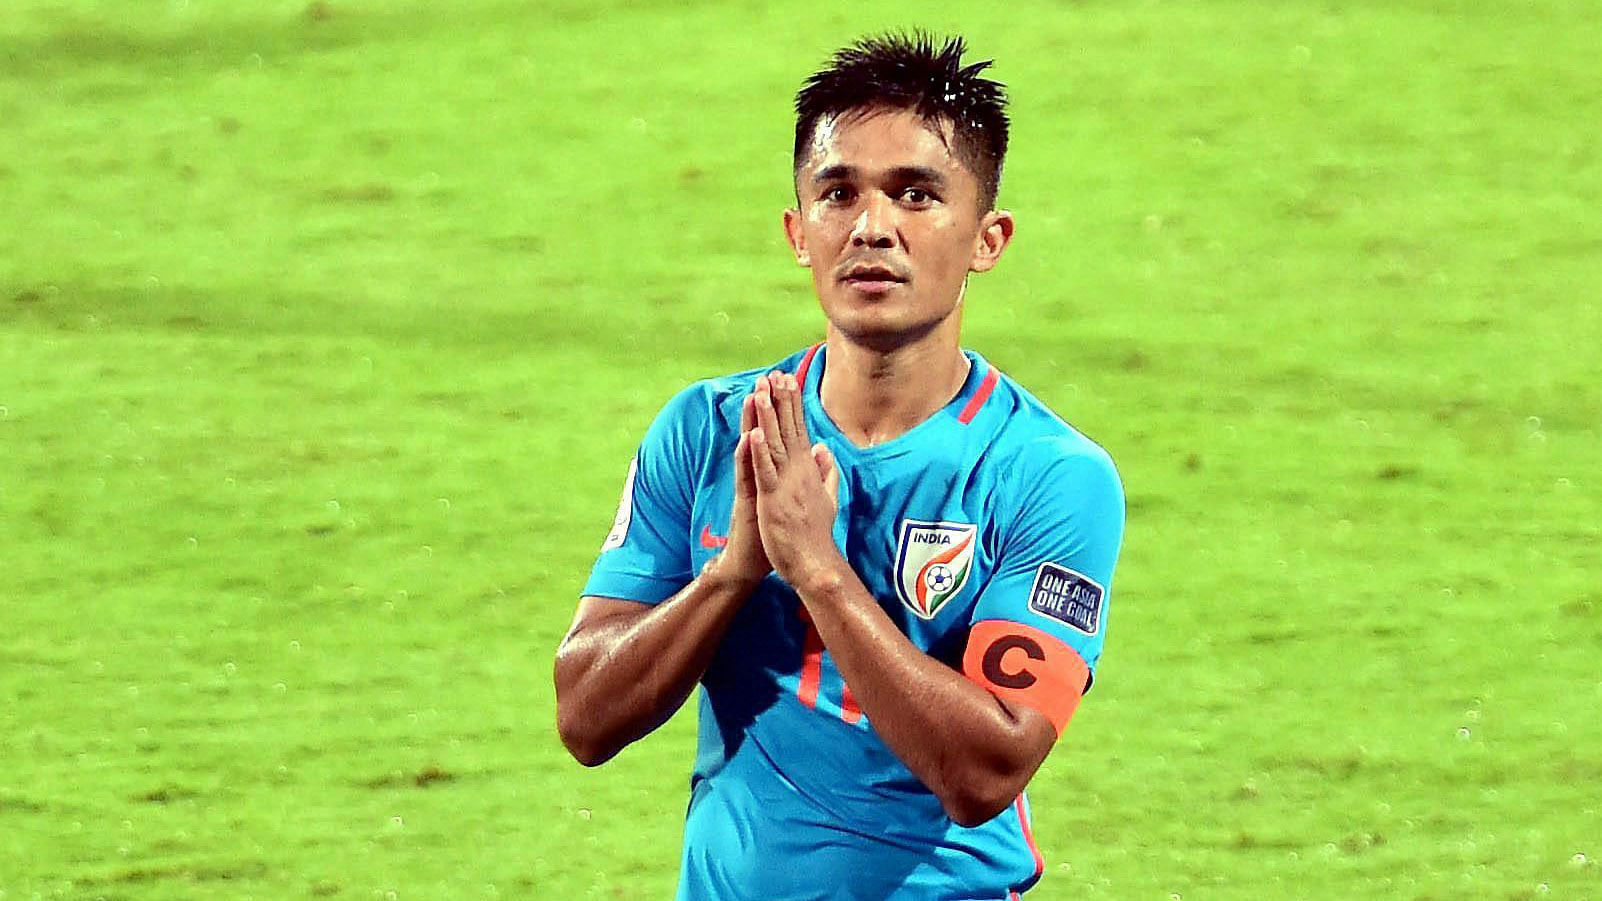 Sunil Chhetri knows he does not have “many” games left for the national team, hence the talisman Indian football team captain wants to work even more harder on his game.